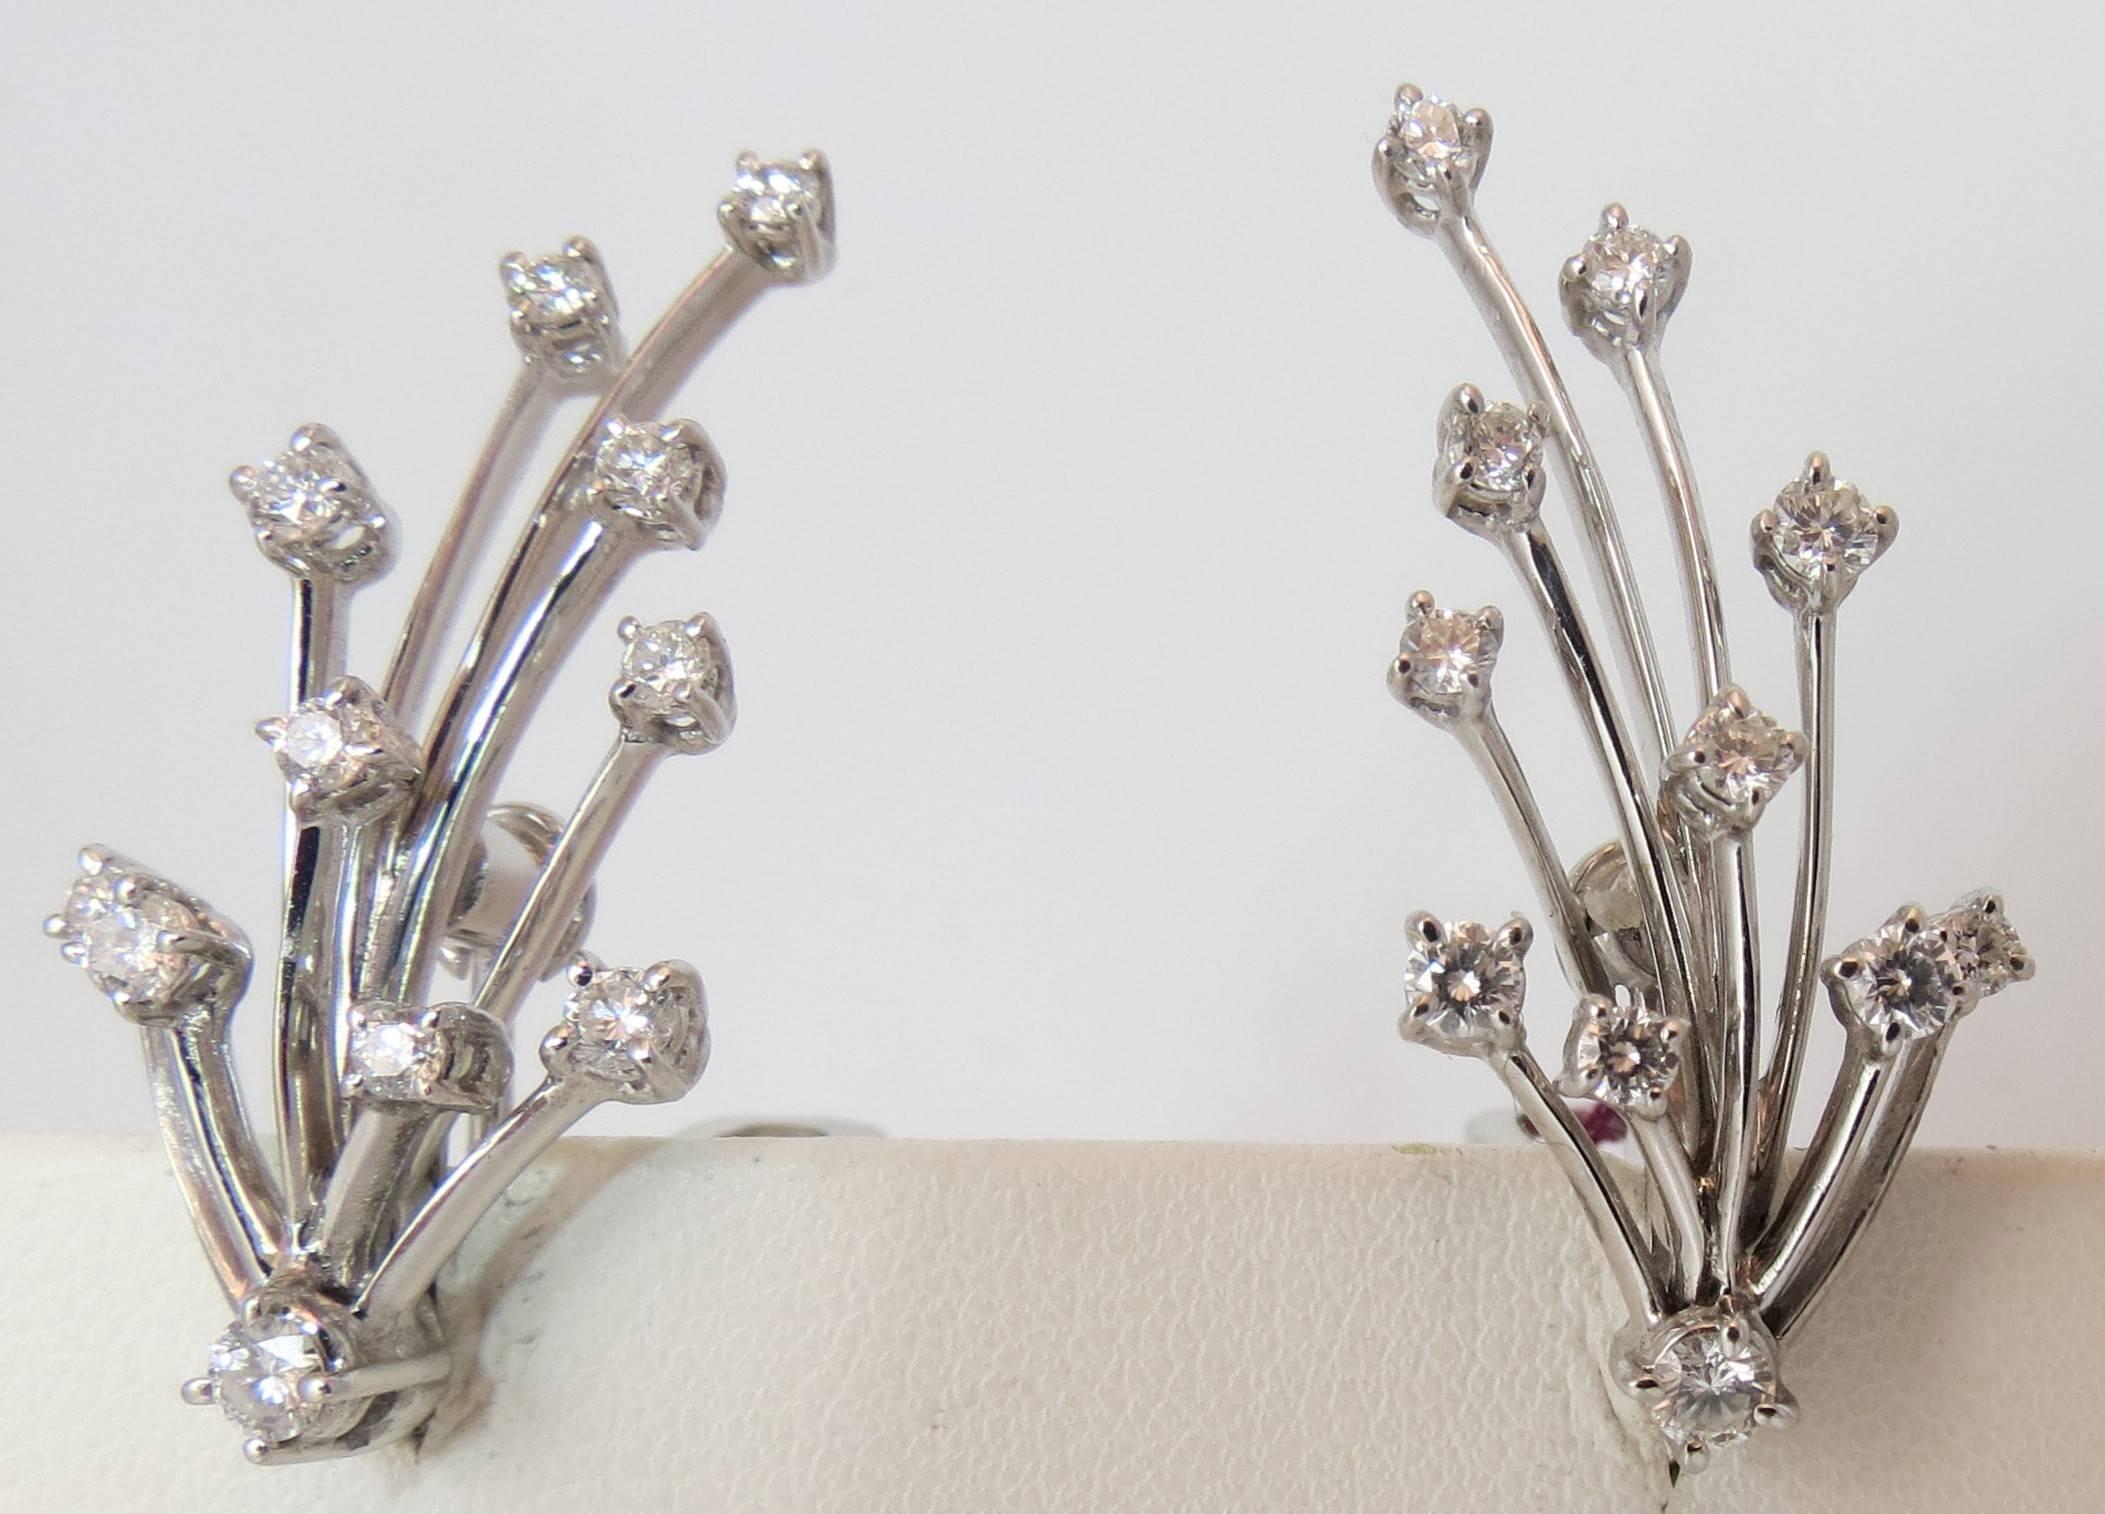 Fabulous Diamond Gold Spray Design Earrings In Excellent Condition For Sale In Chicago, IL